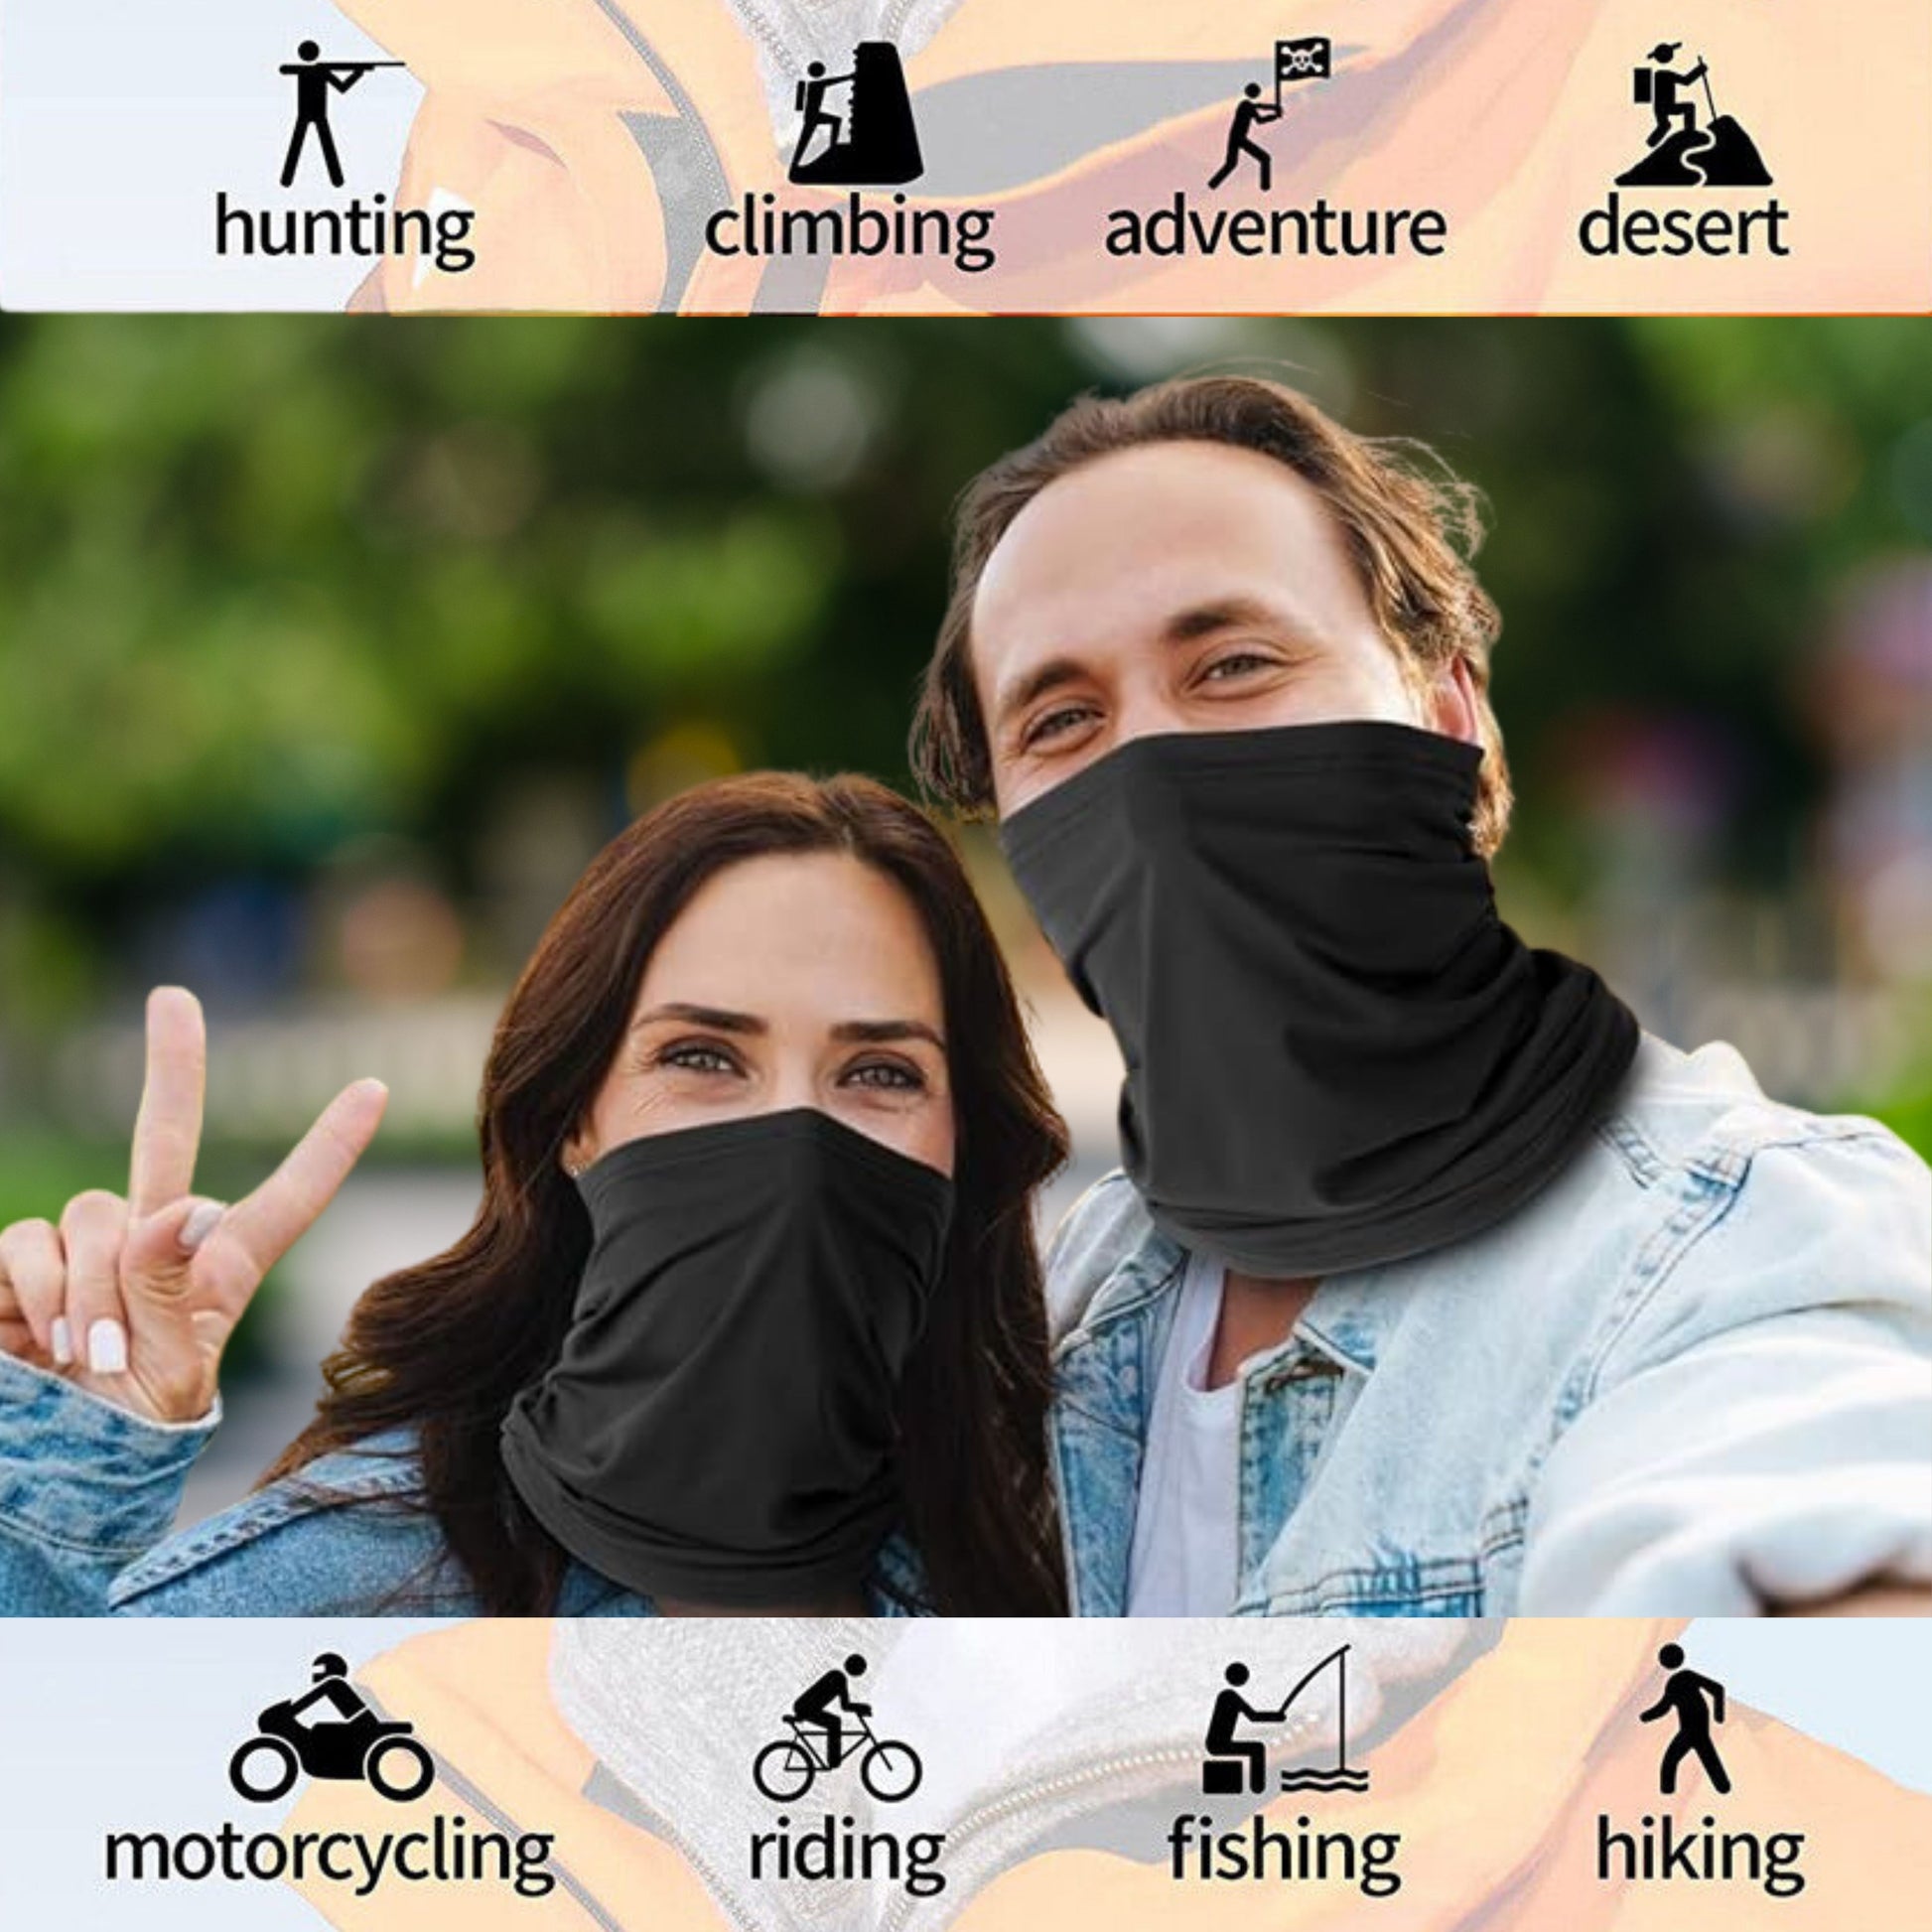 black neck gaiter half mask face cover for men and women used for hiking hunting, climbing adventure, motorcycling, riding fishing and desert